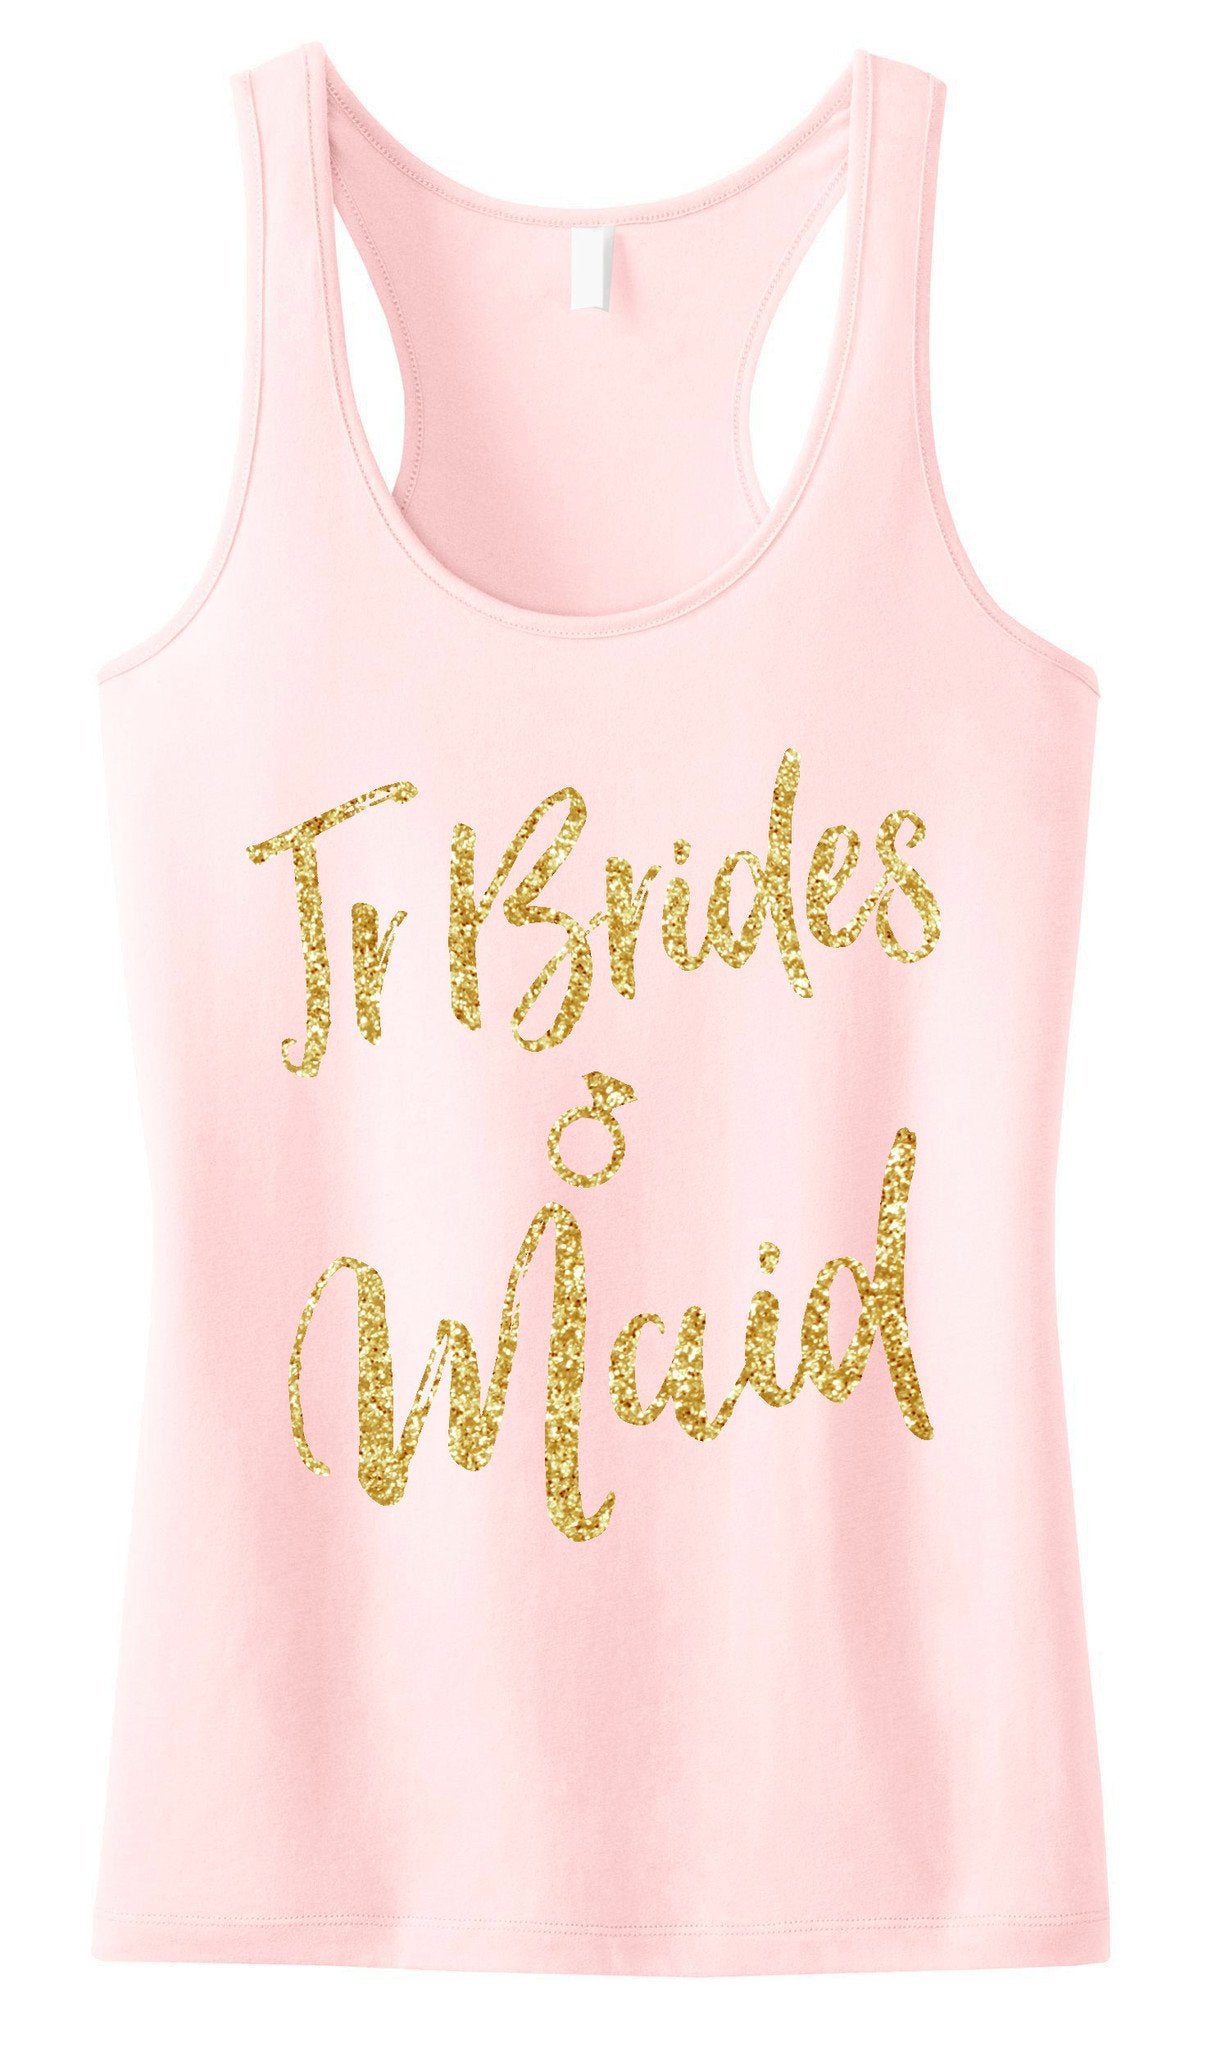 Jr Bridesmaid Tank Top with Gold Glitter